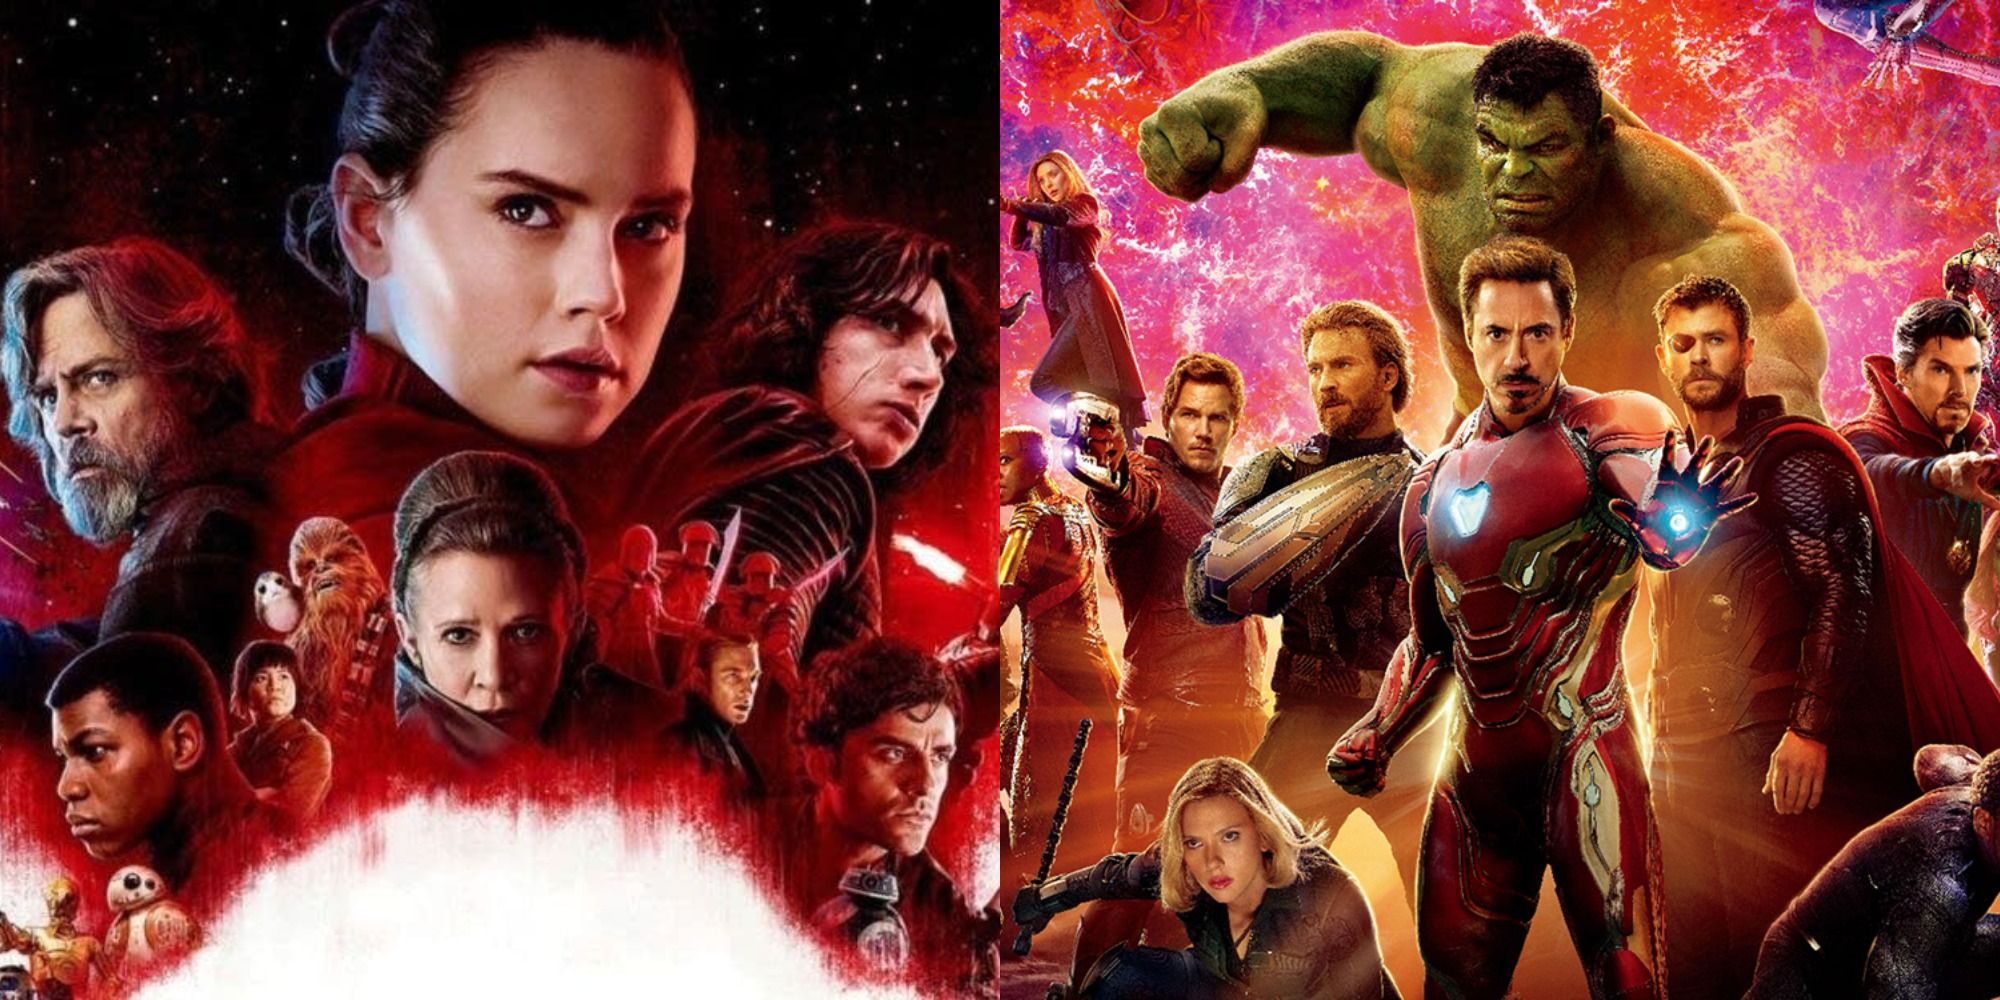 A split image of the Star Wars characters and the Avengers in the MCU